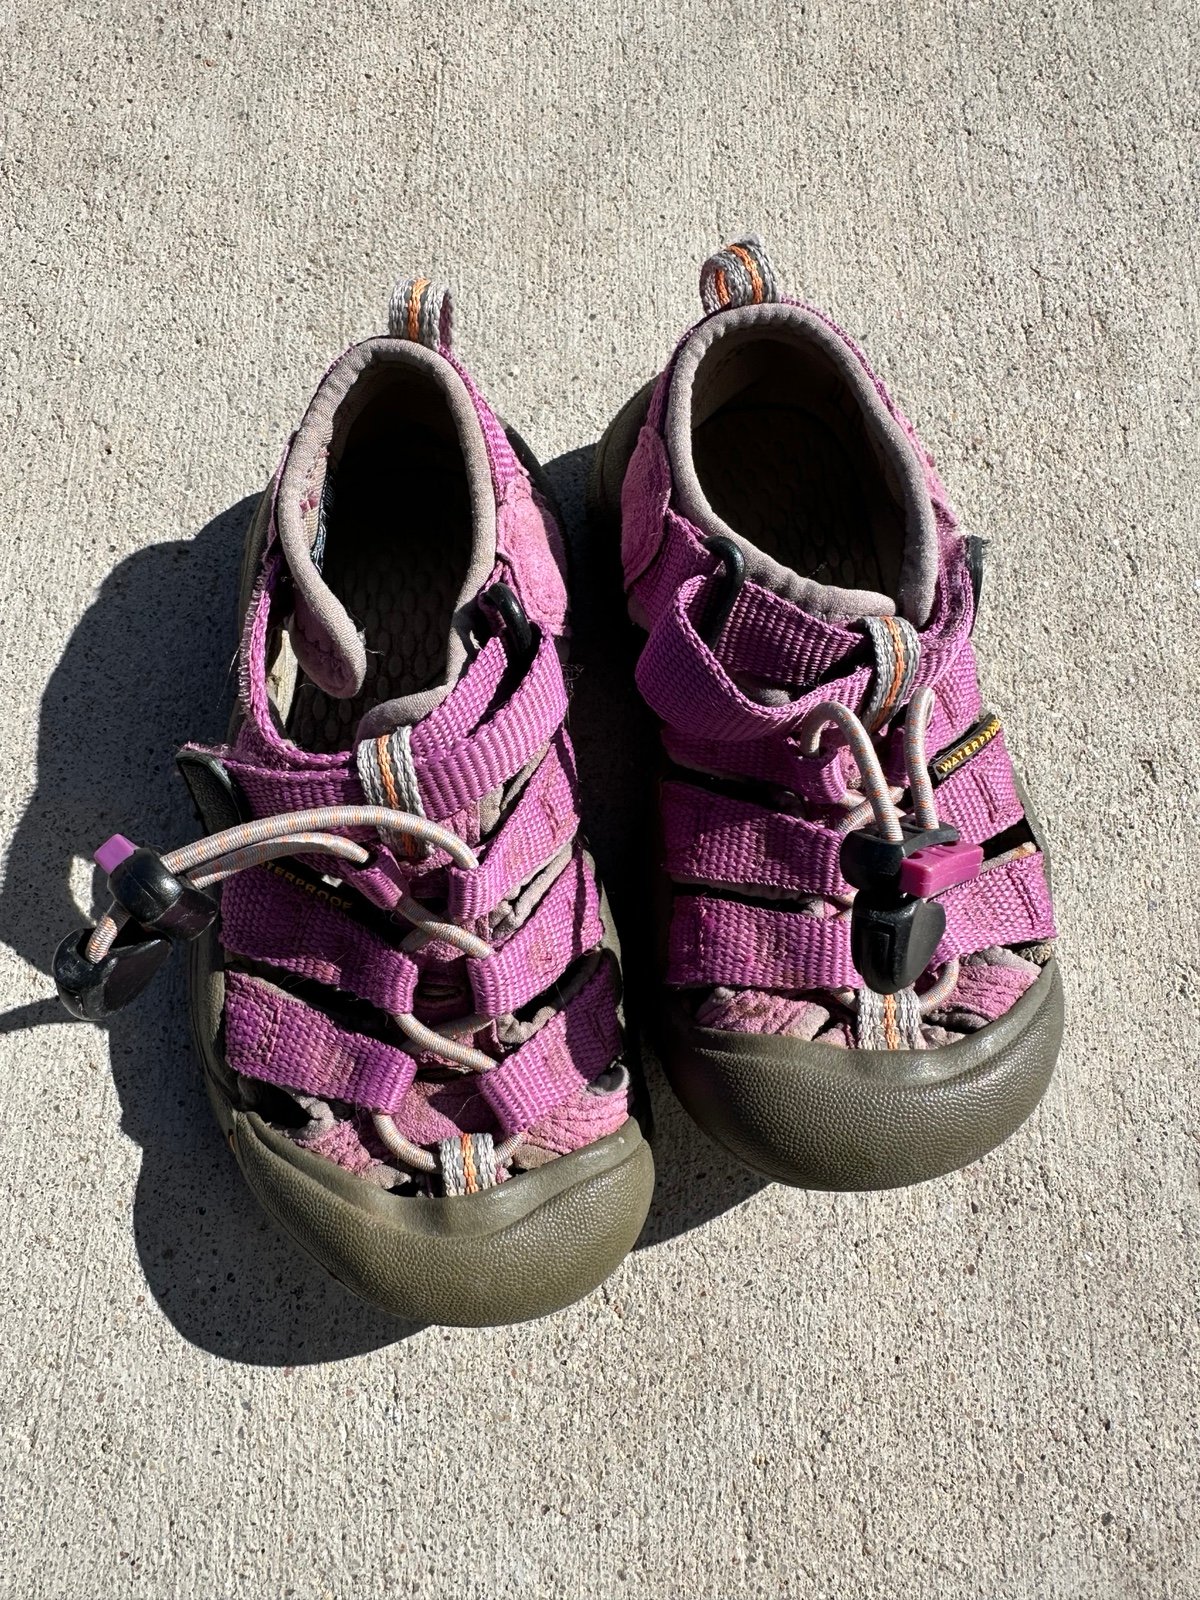 Toddler Hiking Shoes Water Shoes Keen Size 8 QMZPp6Mom